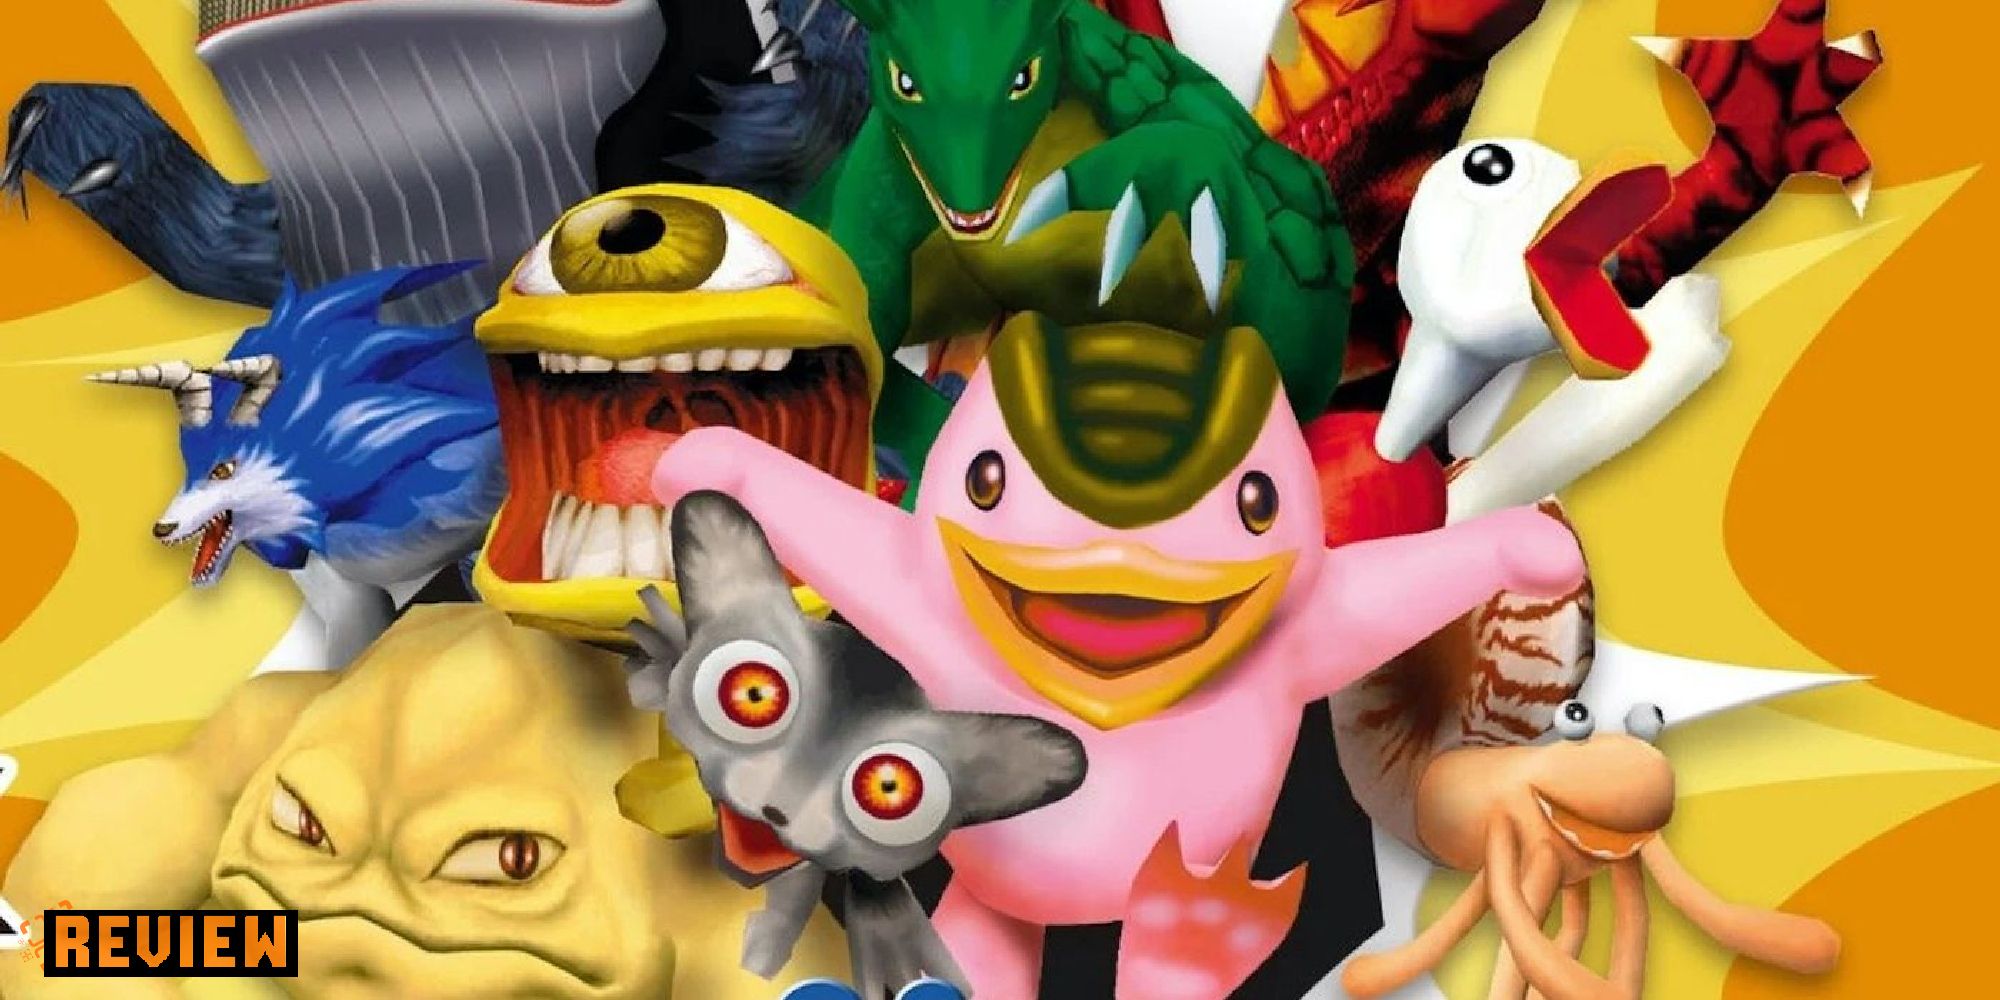 Monster Rancher 1 & 2 DX Review A Nostalgic Blast From The Past